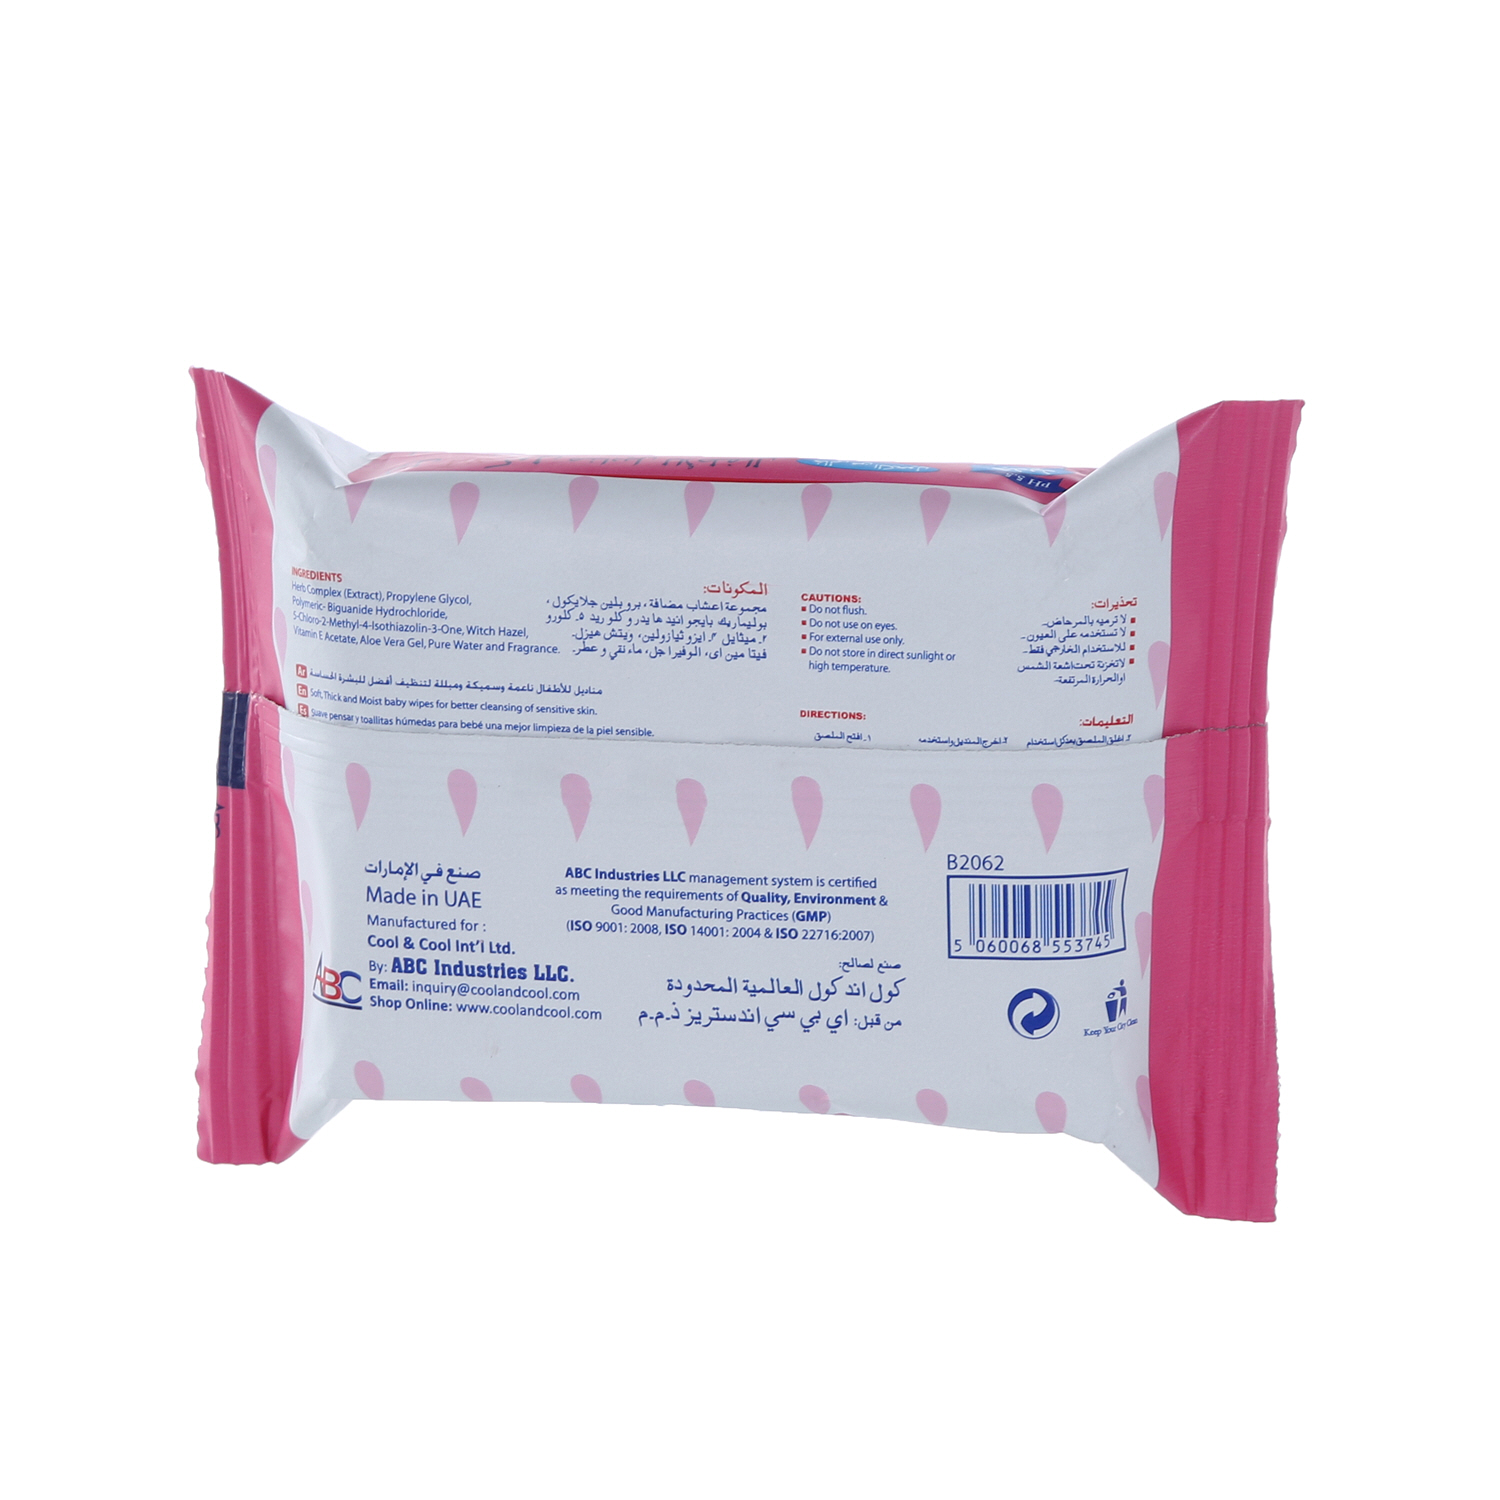 Cool & Cool Baby Wipes 25 Pack